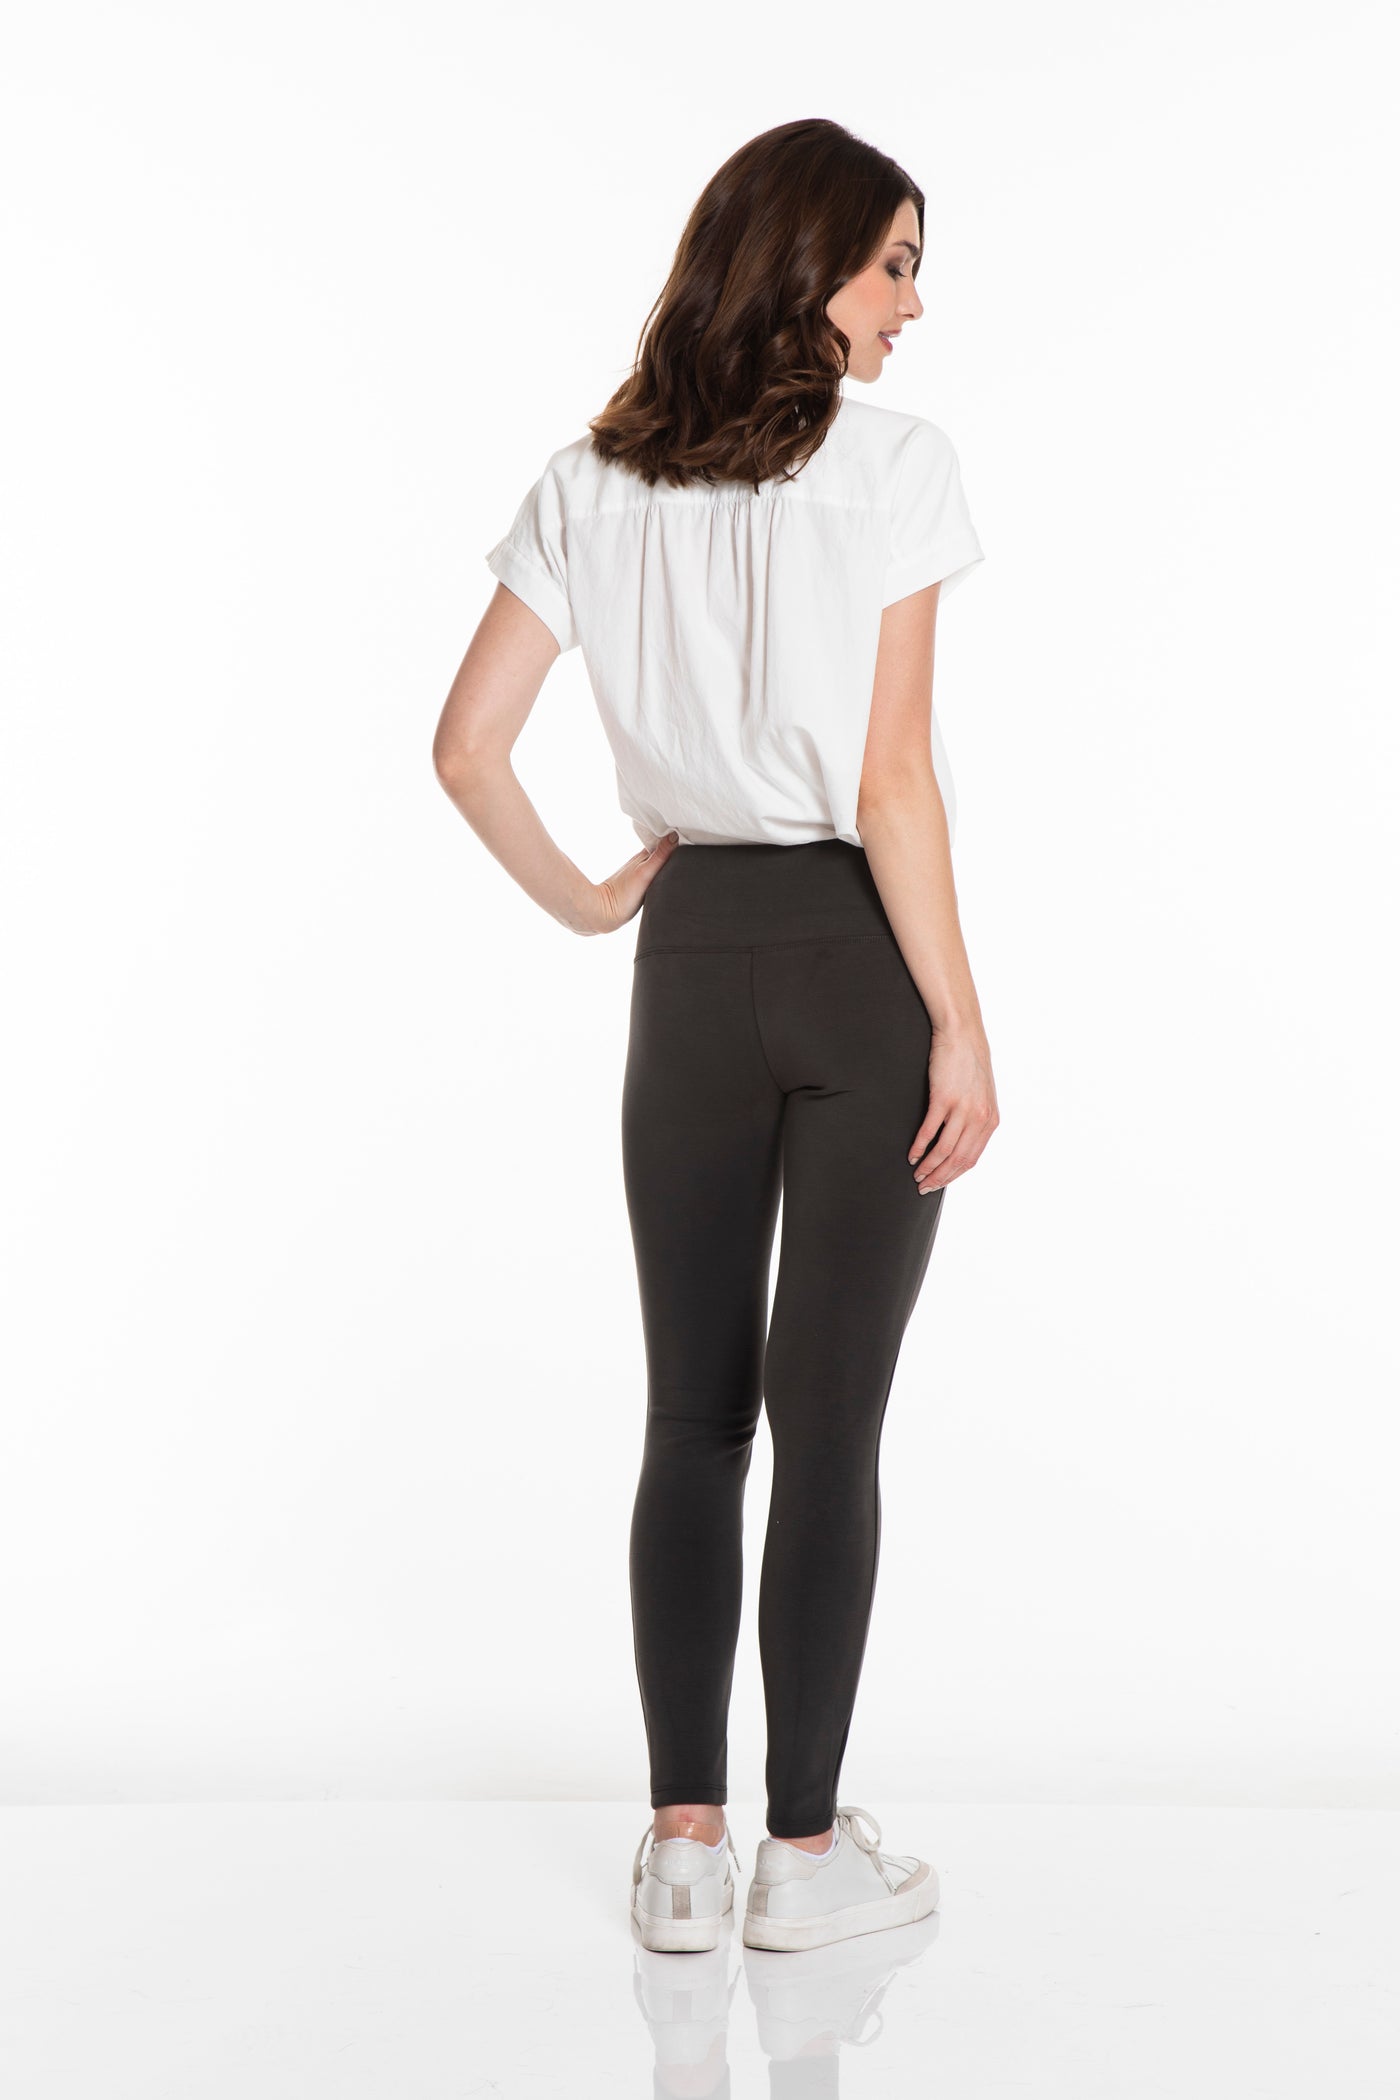 WIDE BAND PULL-ON ANKLE LEGGING - Deep Charcoal